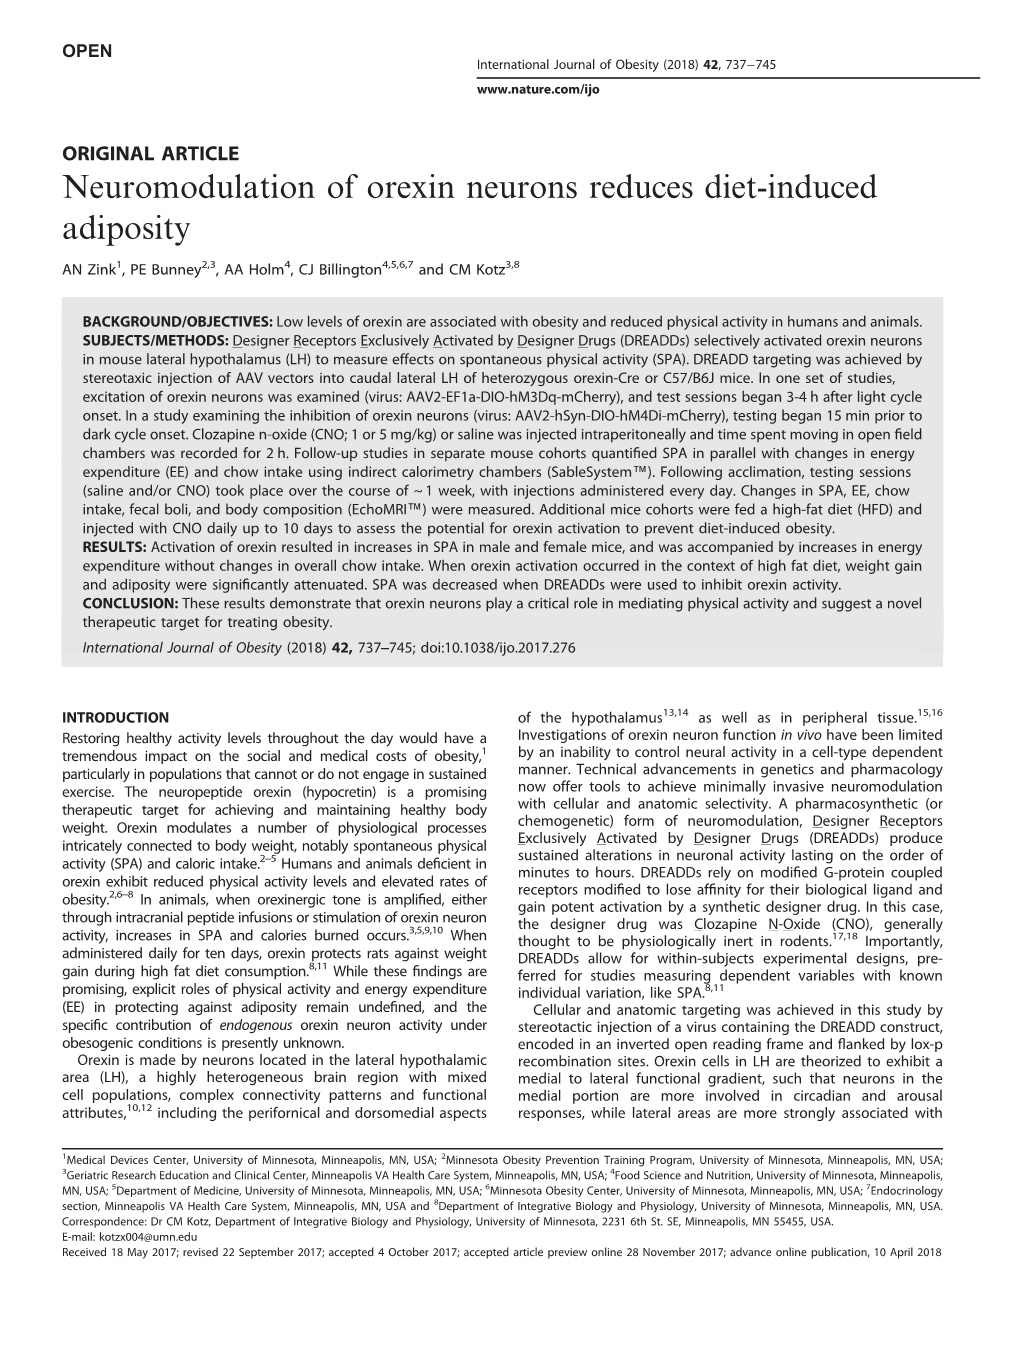 Neuromodulation of Orexin Neurons Reduces Diet-Induced Adiposity